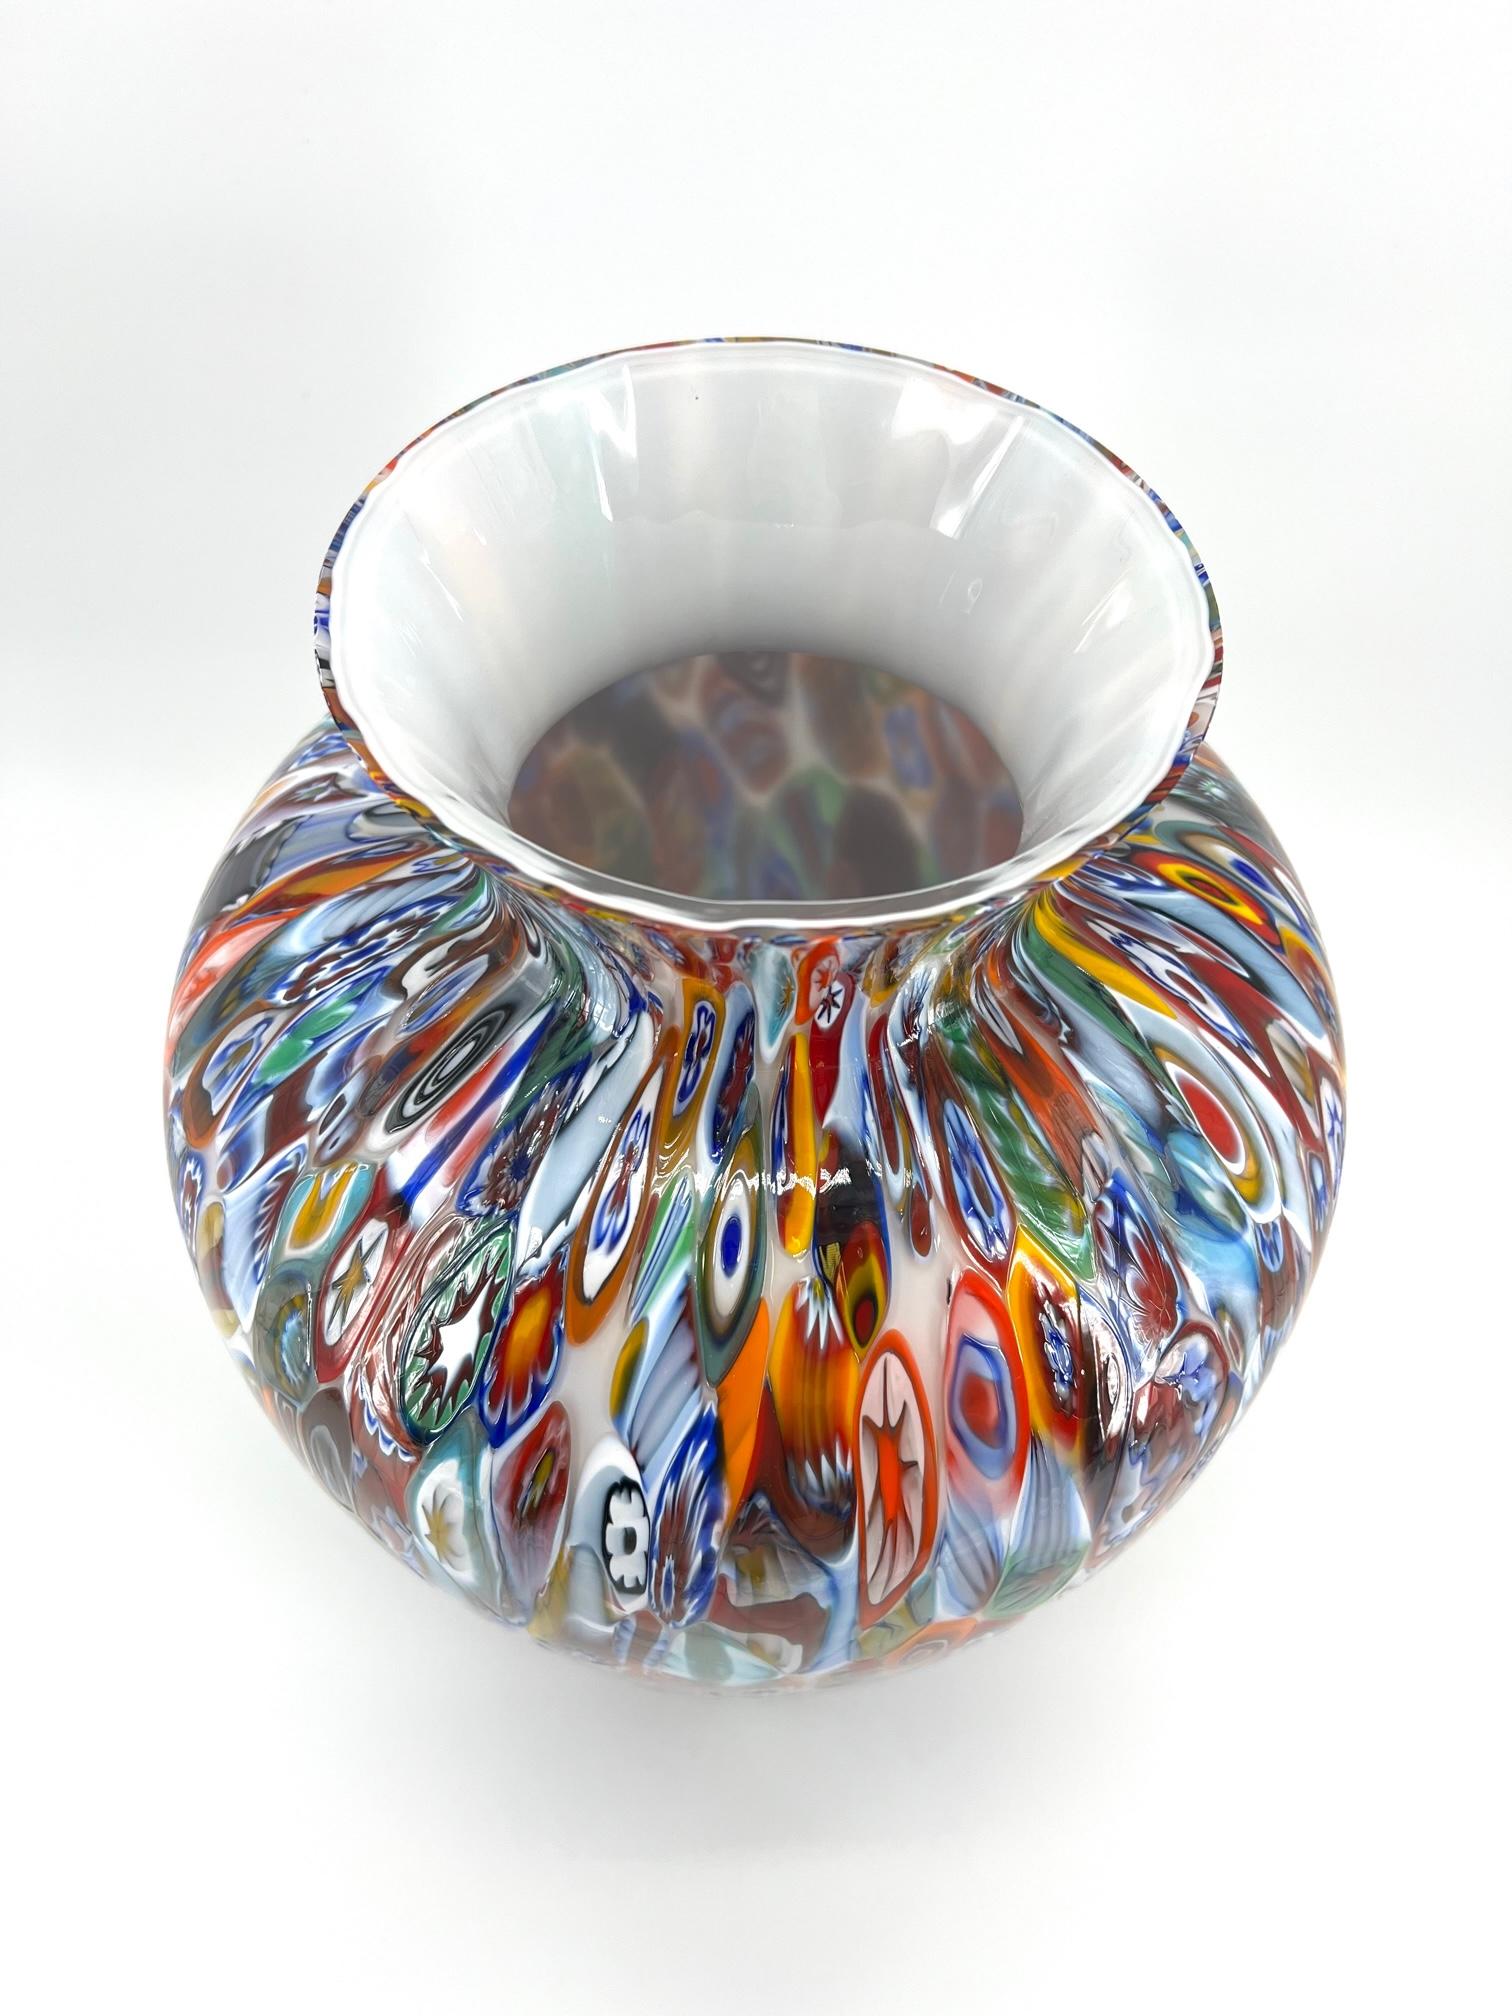 1295 Murano Hand Made Glass Millefiori Murrine Vase Big Size Height 18, 5 Inches In New Condition For Sale In Venice, VE